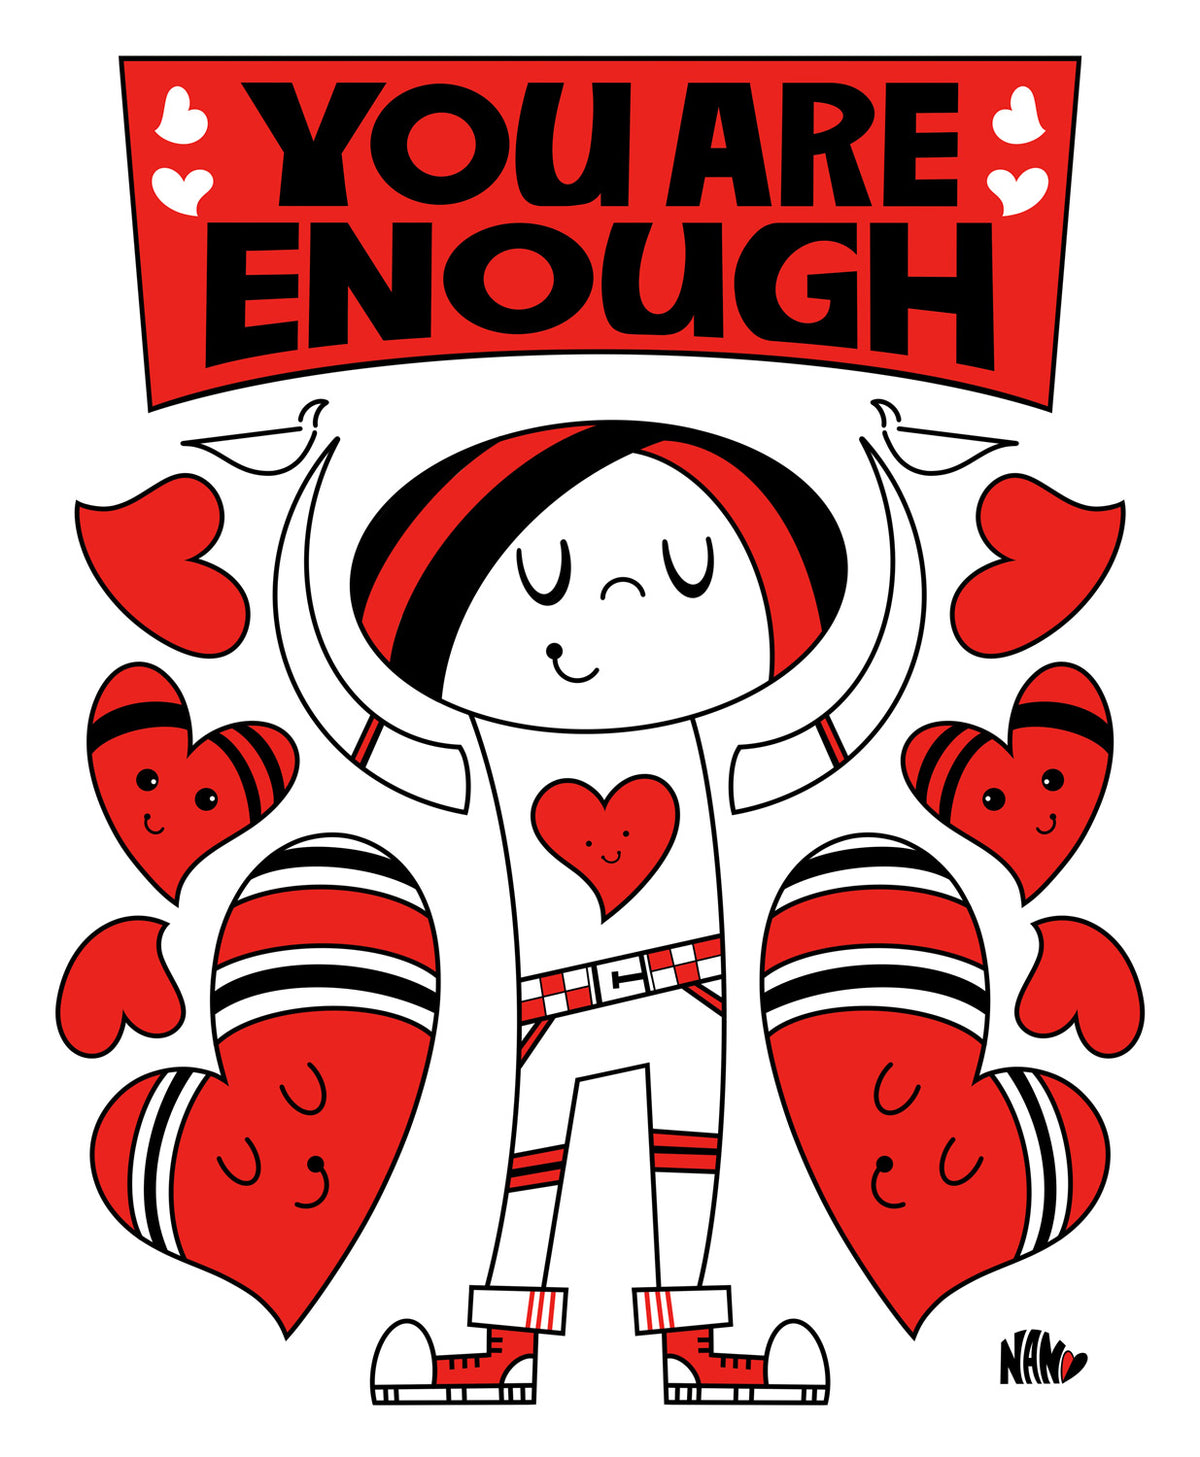 You Are Enough - Print